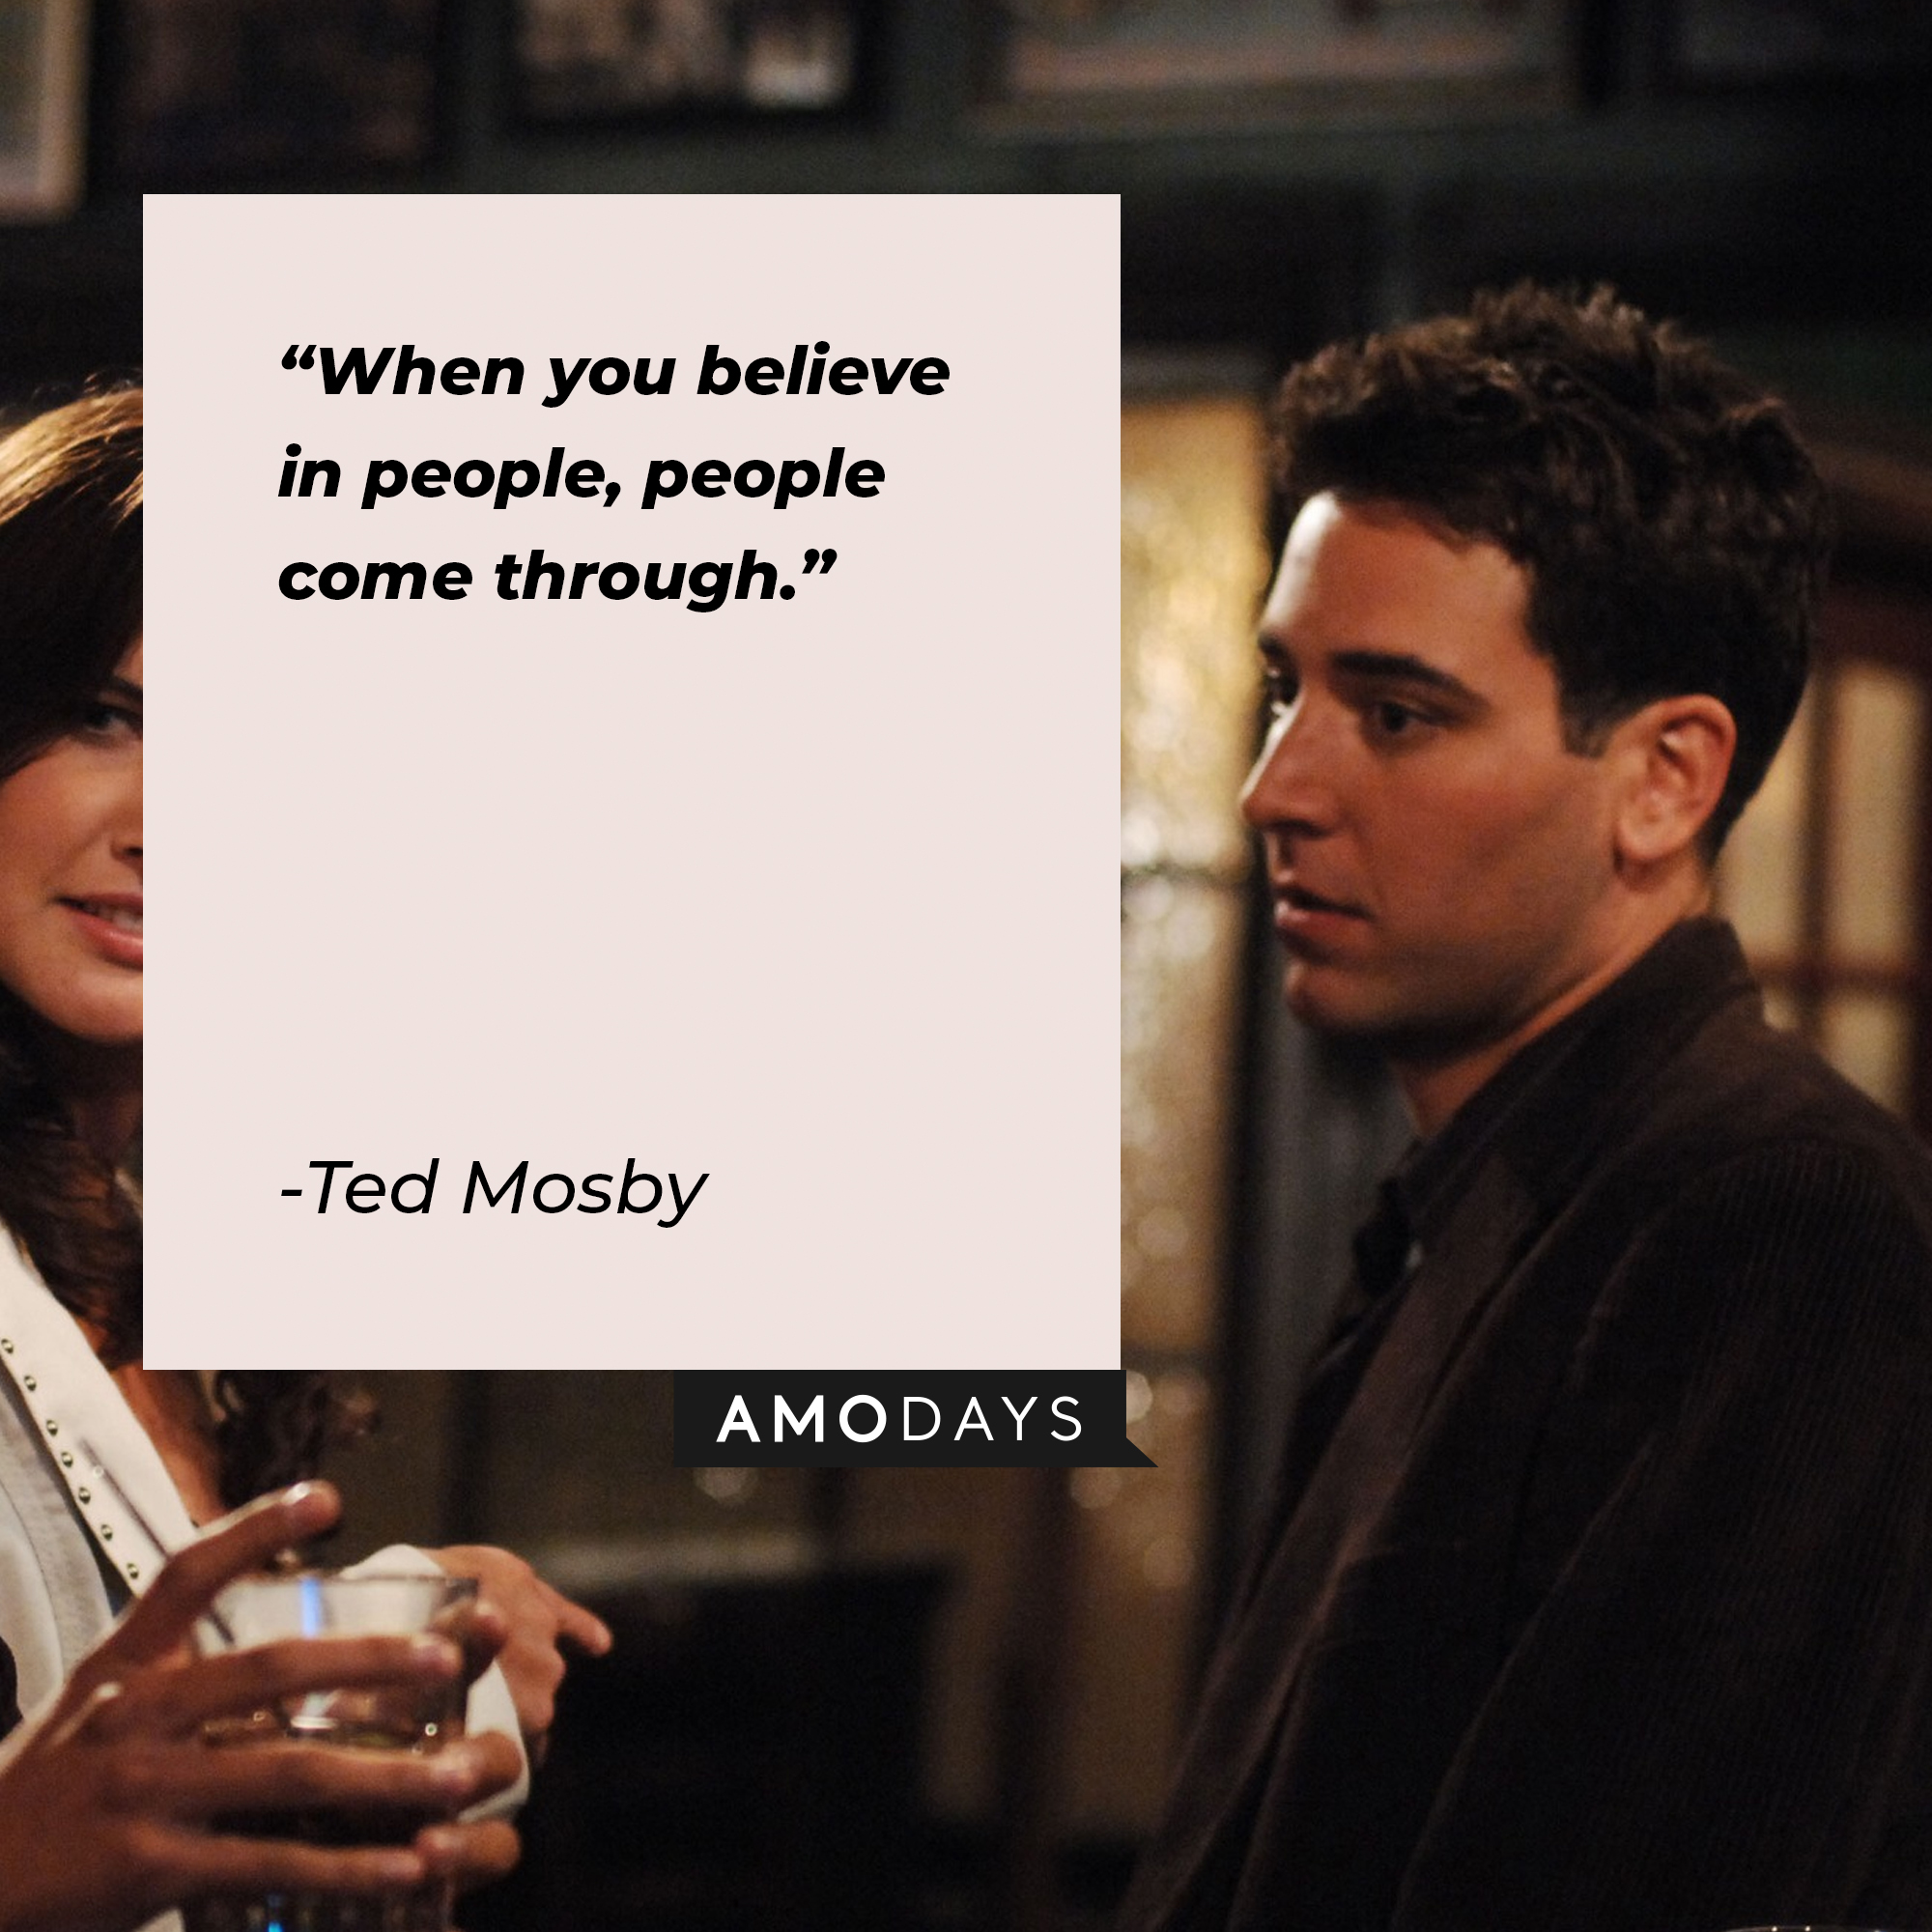 A picture of Ted Mosby with his quote, “When you believe in people, people come through.” | Source: facebook.com/OfficialHowIMetYourMother